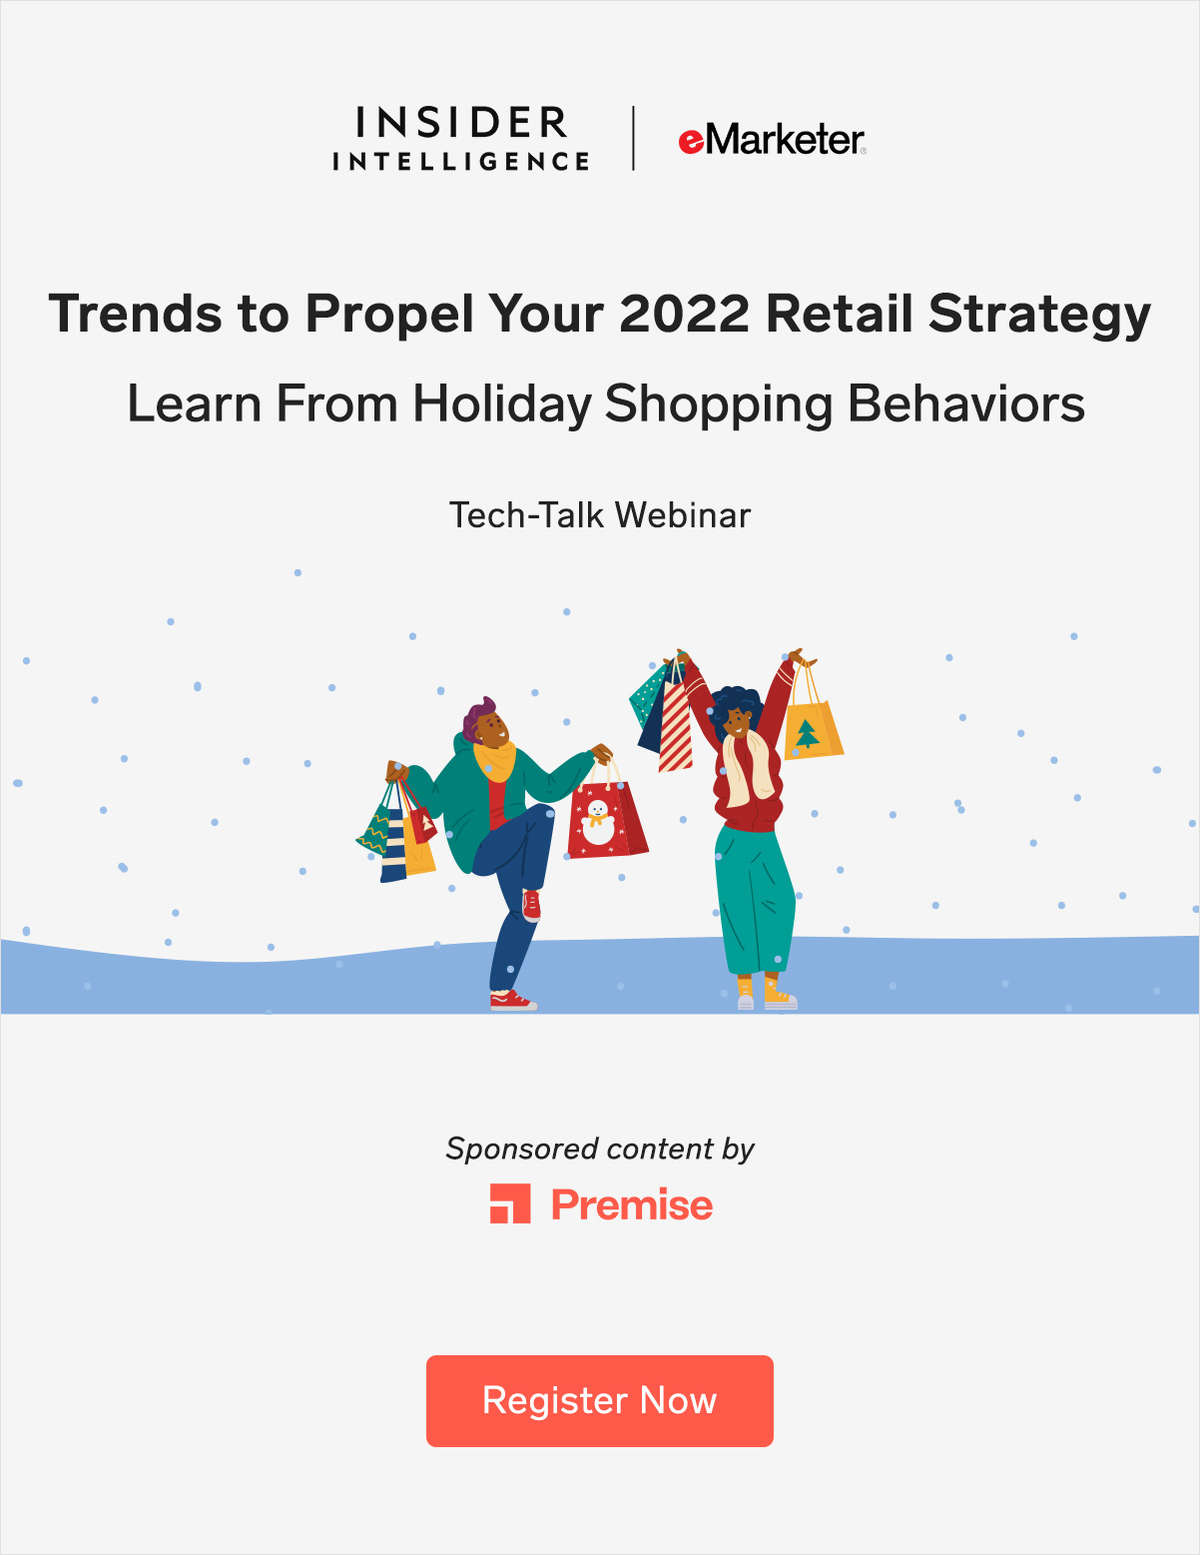 Holiday Insights to Propel Your Retail Strategy Forward in 2022